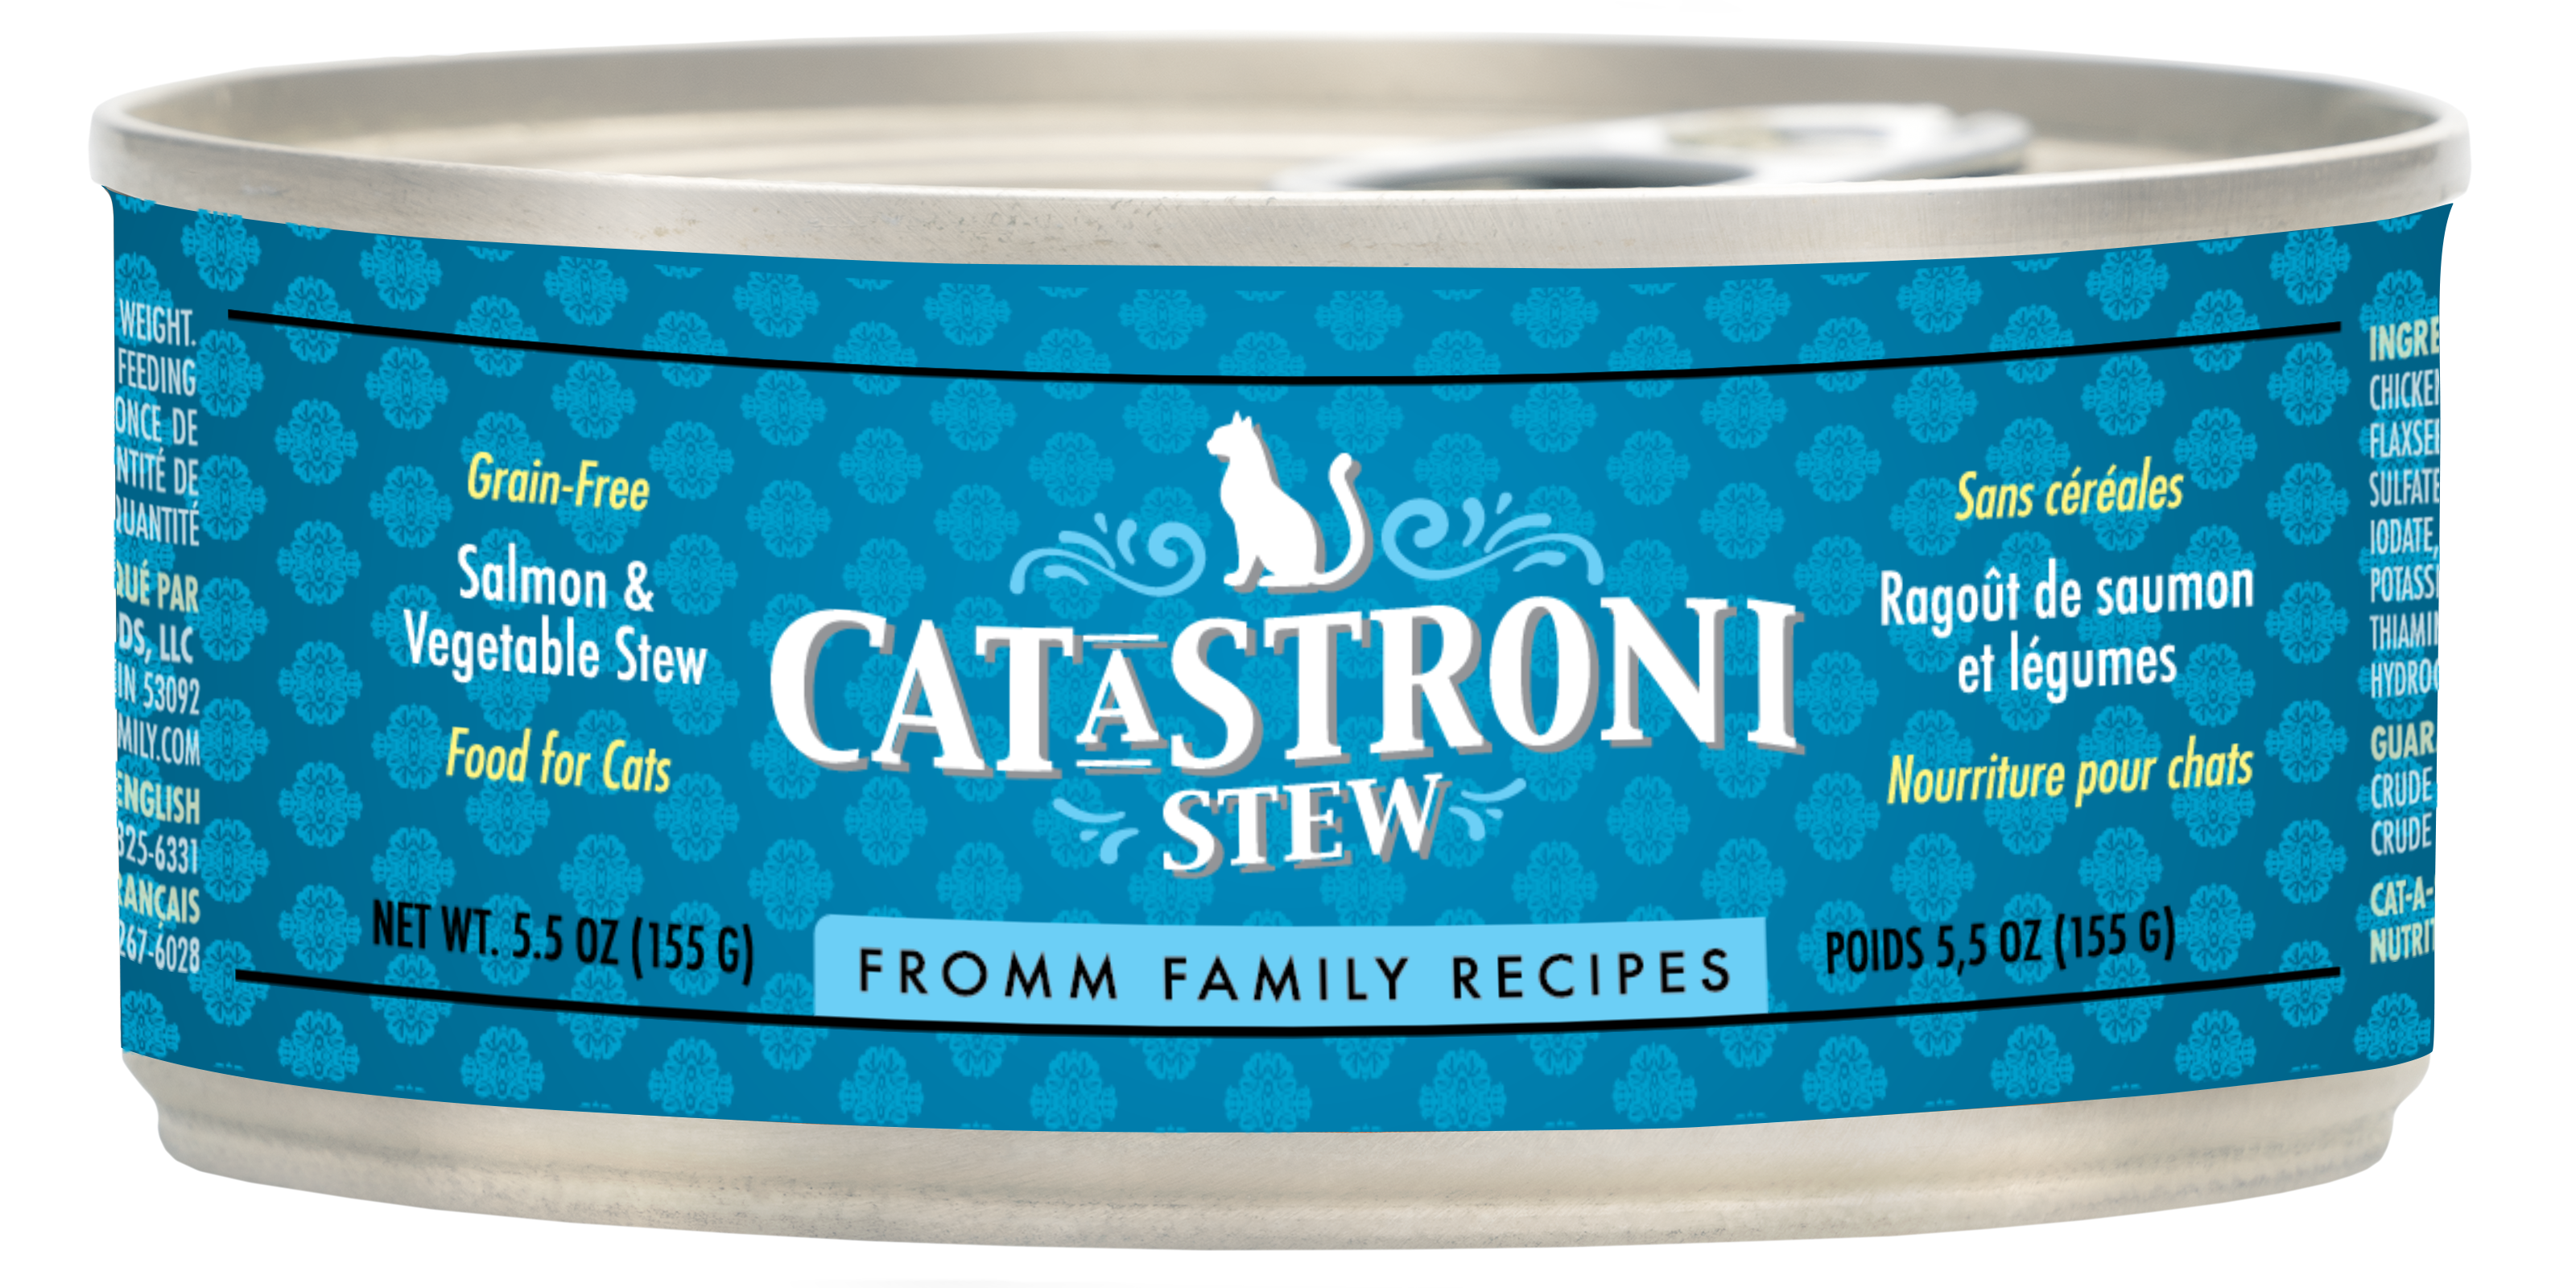 Fromm Cat-A-Stroni Stew 5.5oz Canned Cat Food Salmon - Paw Naturals